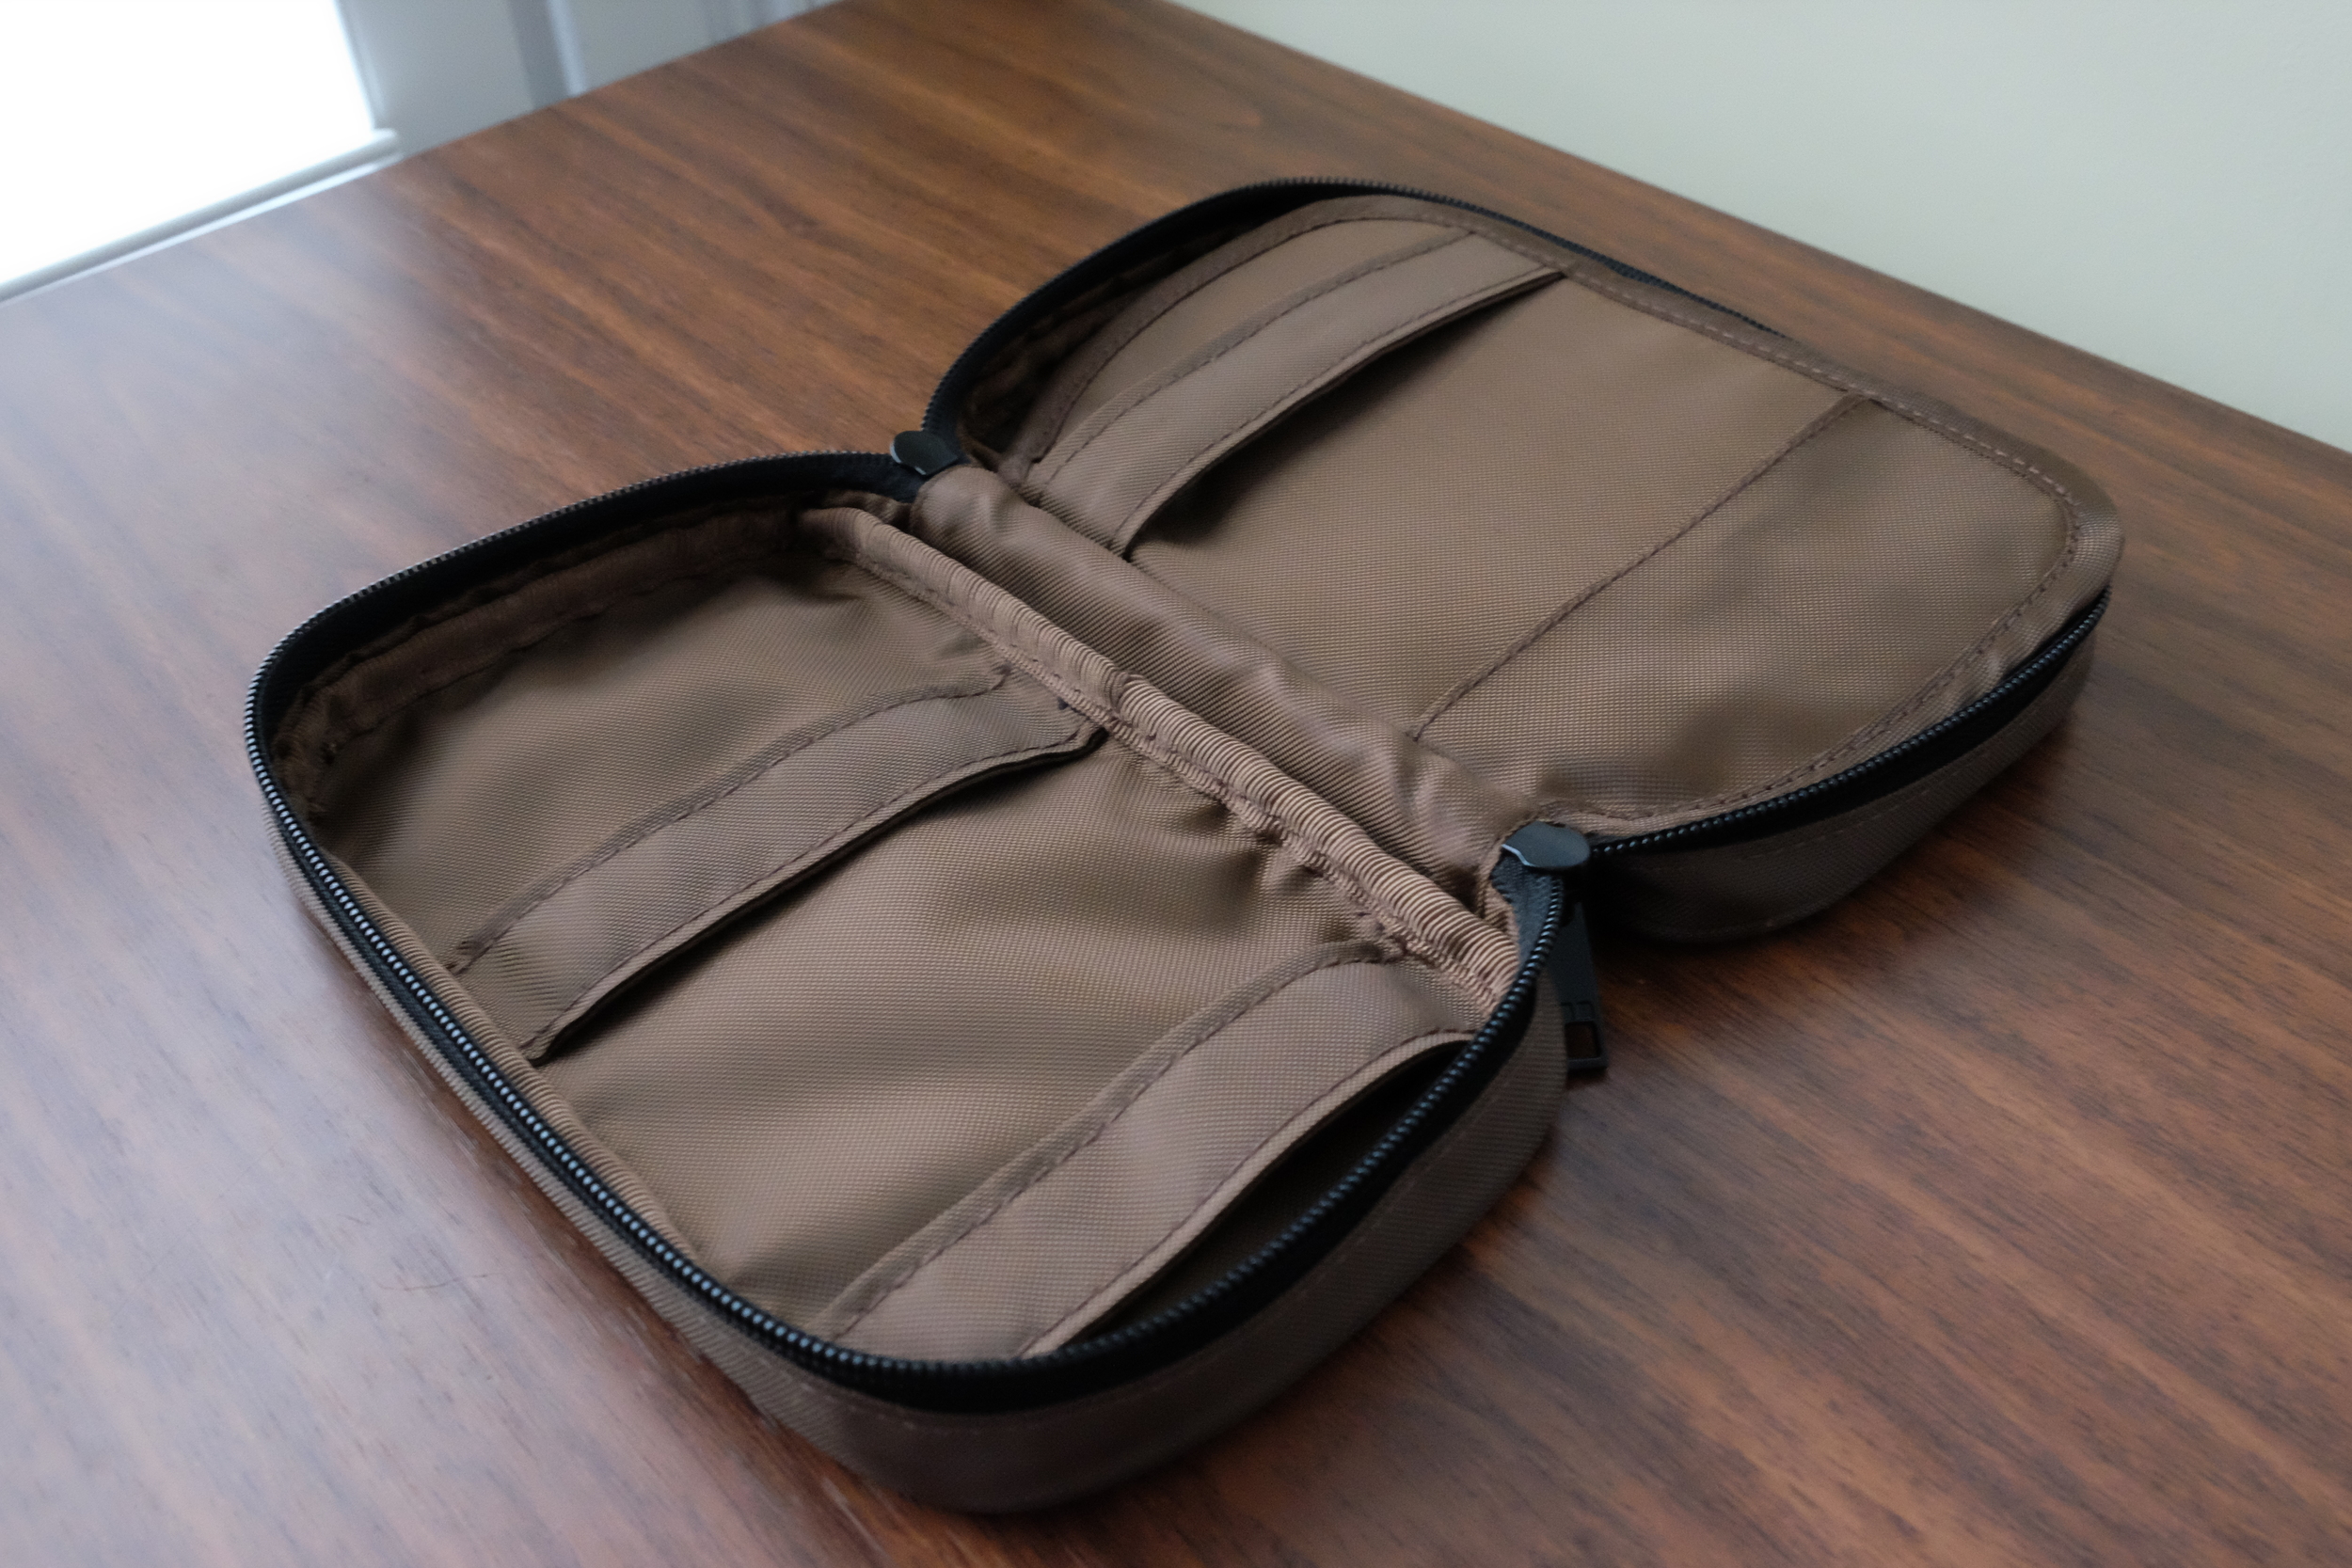 Case Review: Lihit Lab Smart Fit Mobile Pouch - The Well-Appointed Desk